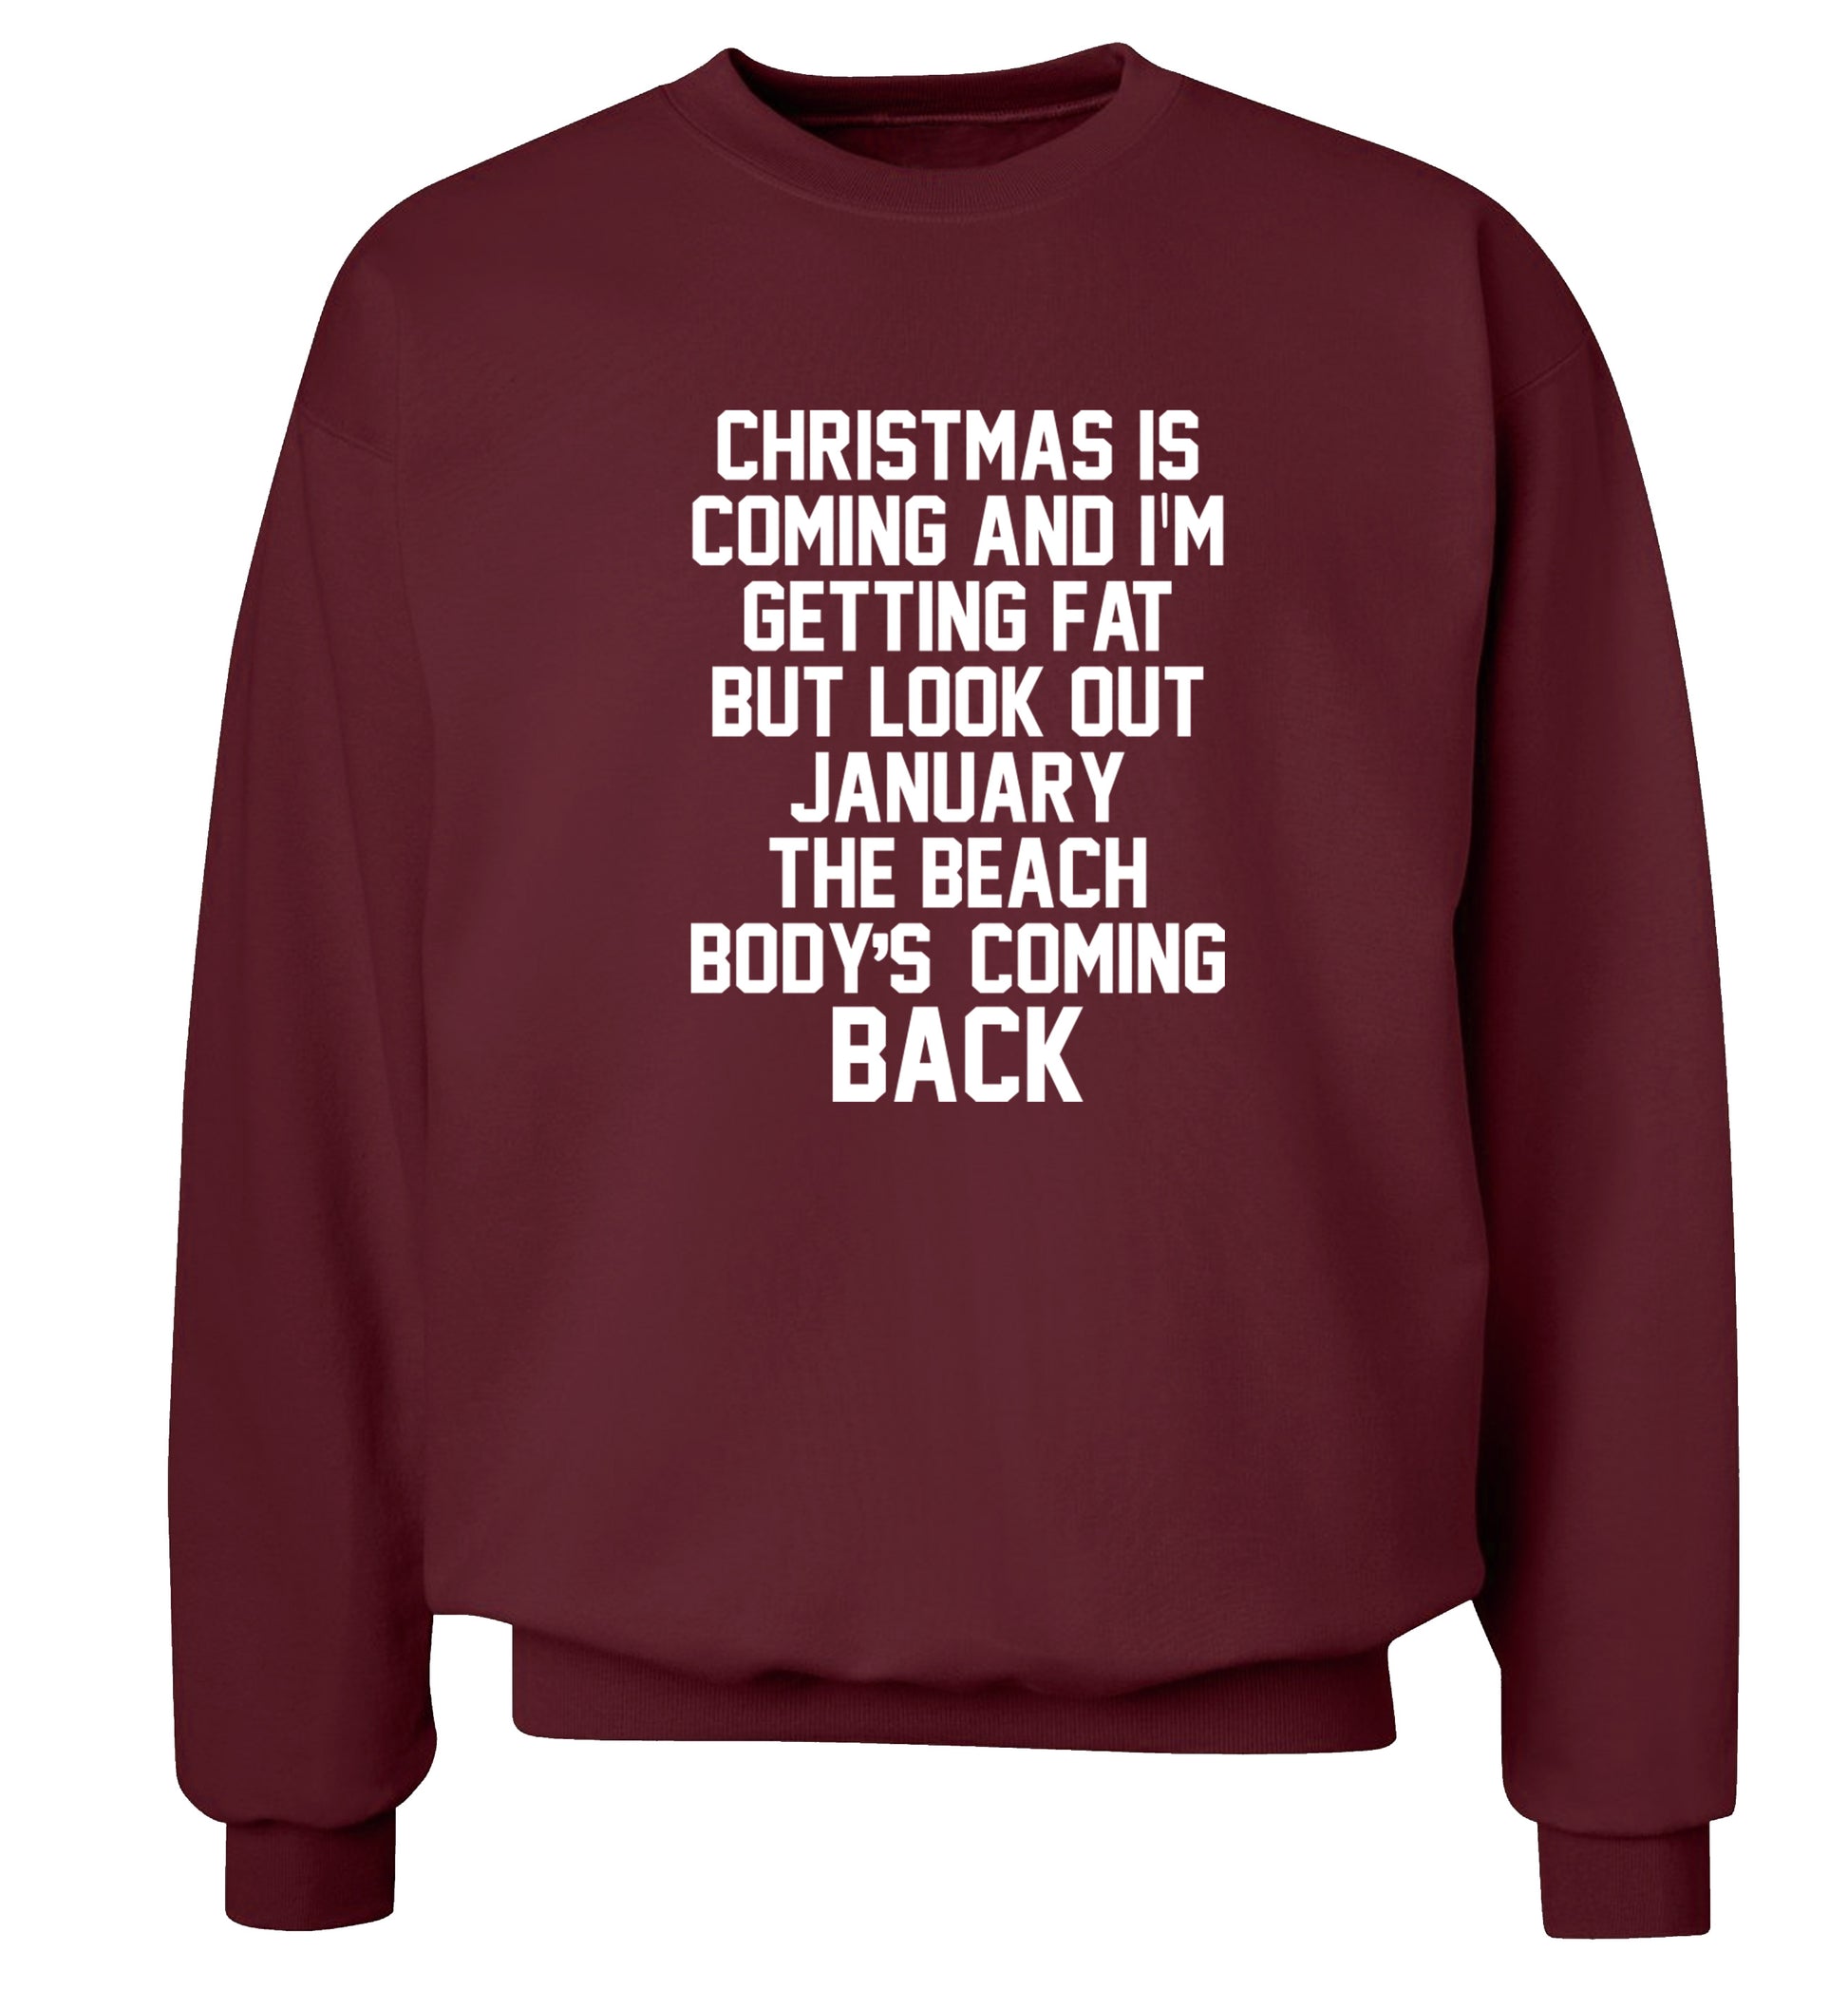 Christmas is coming and I'm getting fat but look out January the beach body's coming back! Adult's unisex maroon Sweater 2XL